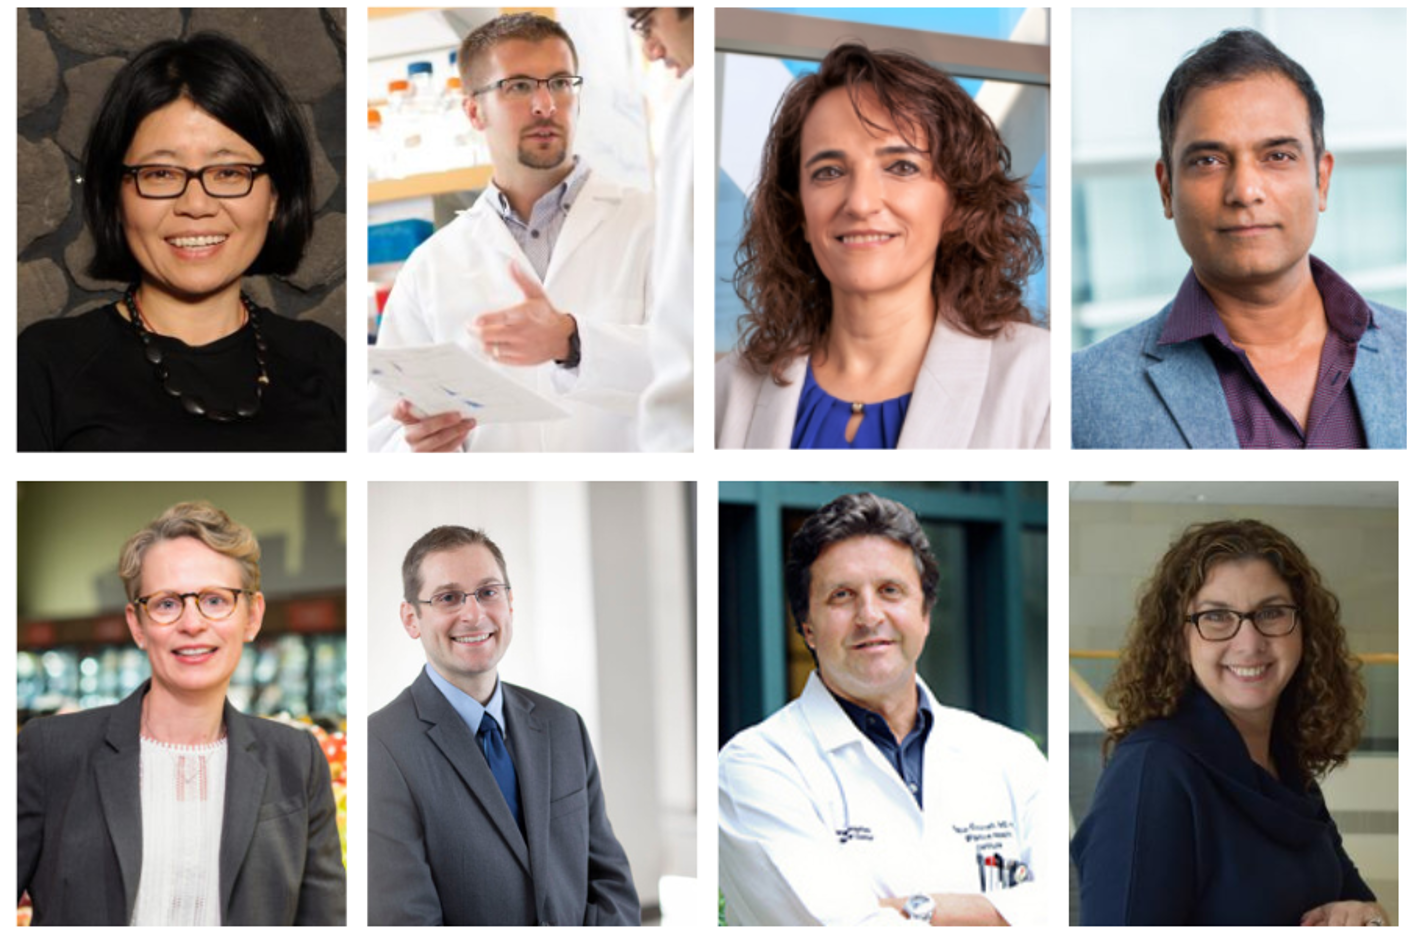 Collage of faculty headshots in the school of medicine 